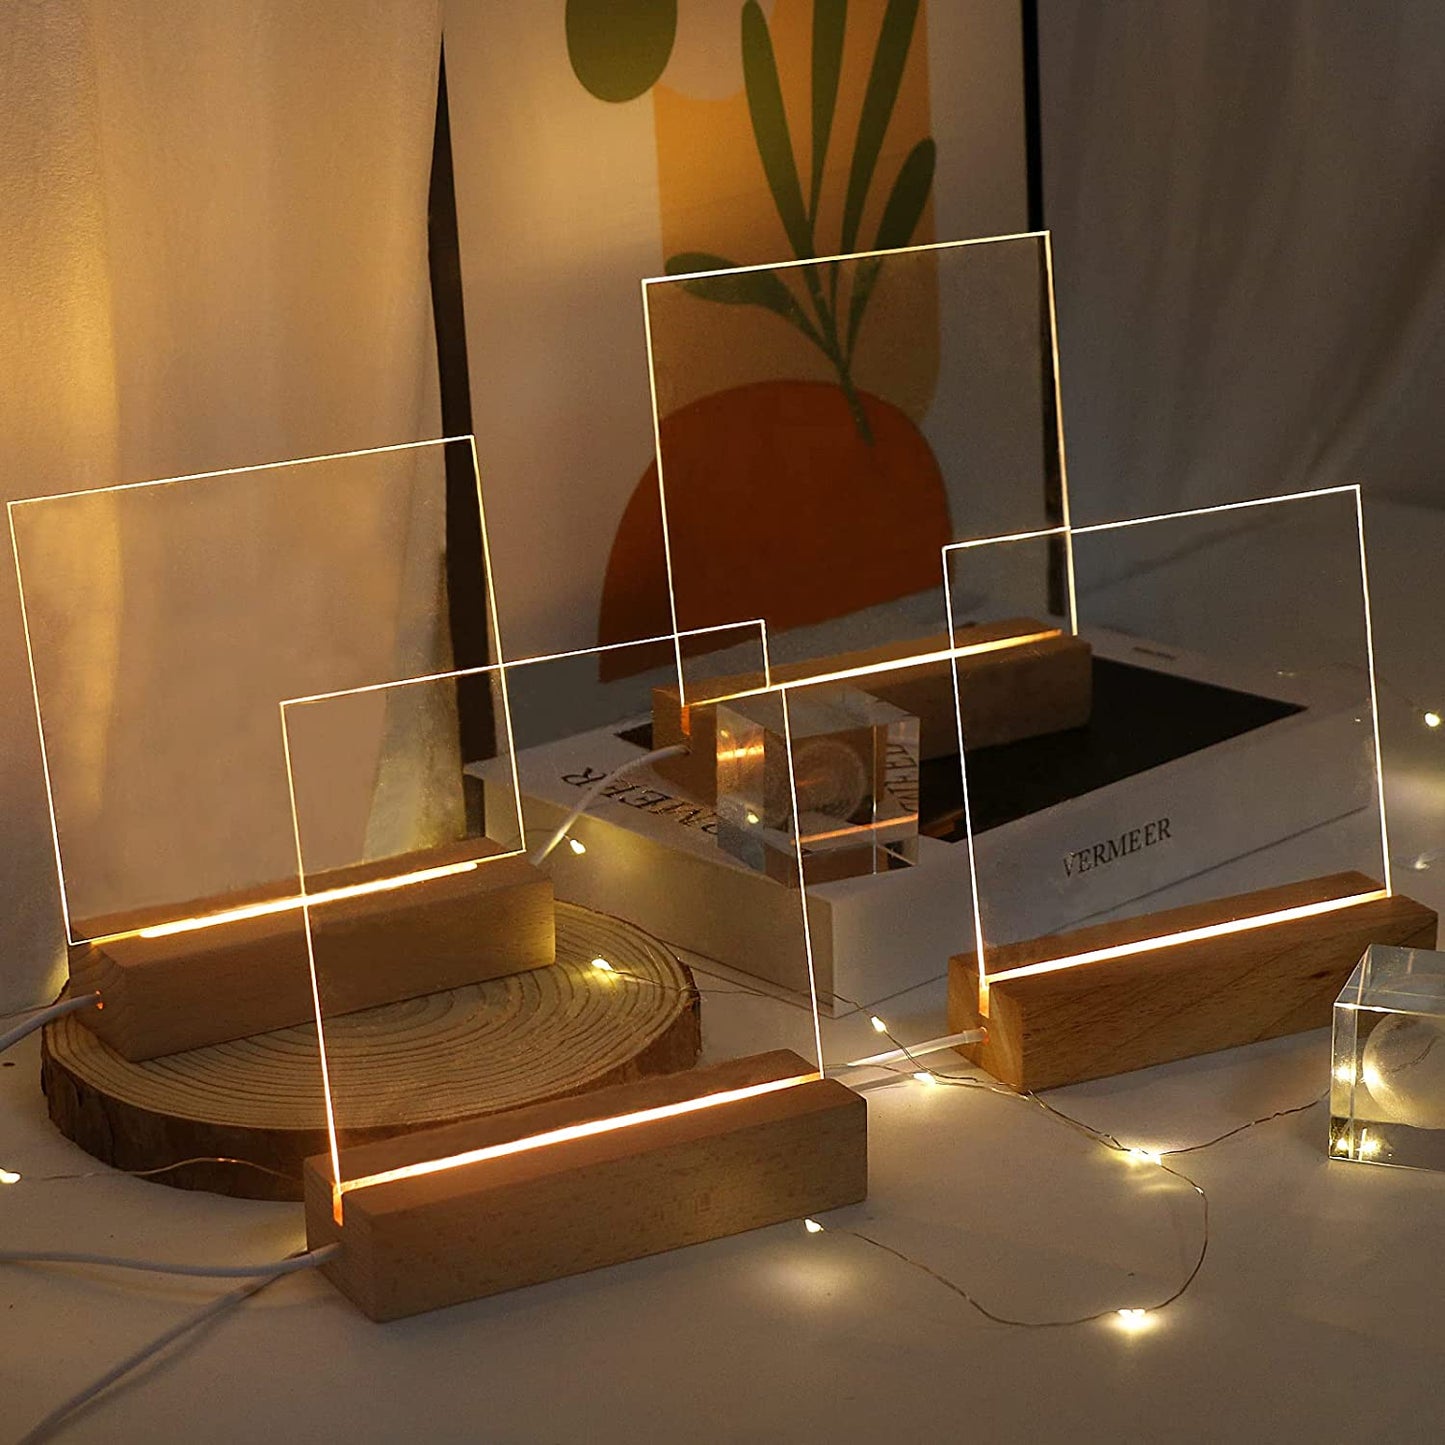 Pack of 4 LED Wooden Display Base with Acrylic Sheets -- 6 inch Rectangle LED Light Base Acrylic Blanks Display Stand Pedestal Warm Lights for Office Bar Room Cafe Home Decor